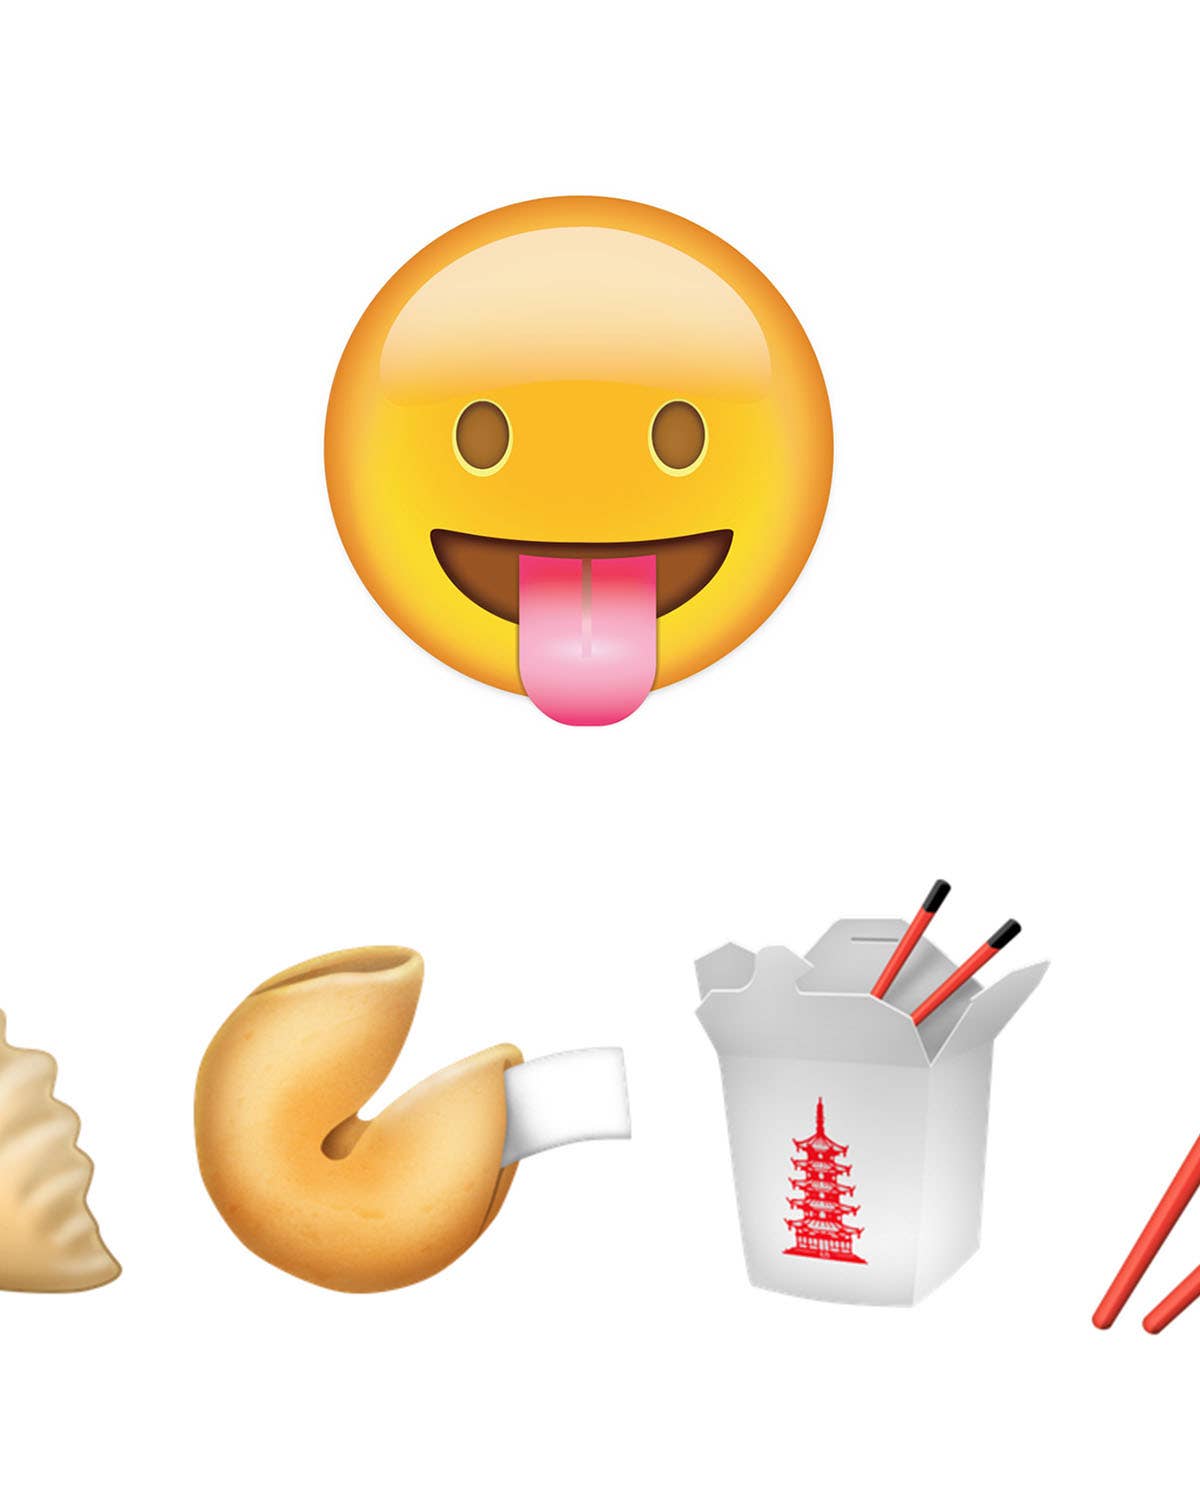 All the Foods Still Missing from Unicode’s New Emoji Release